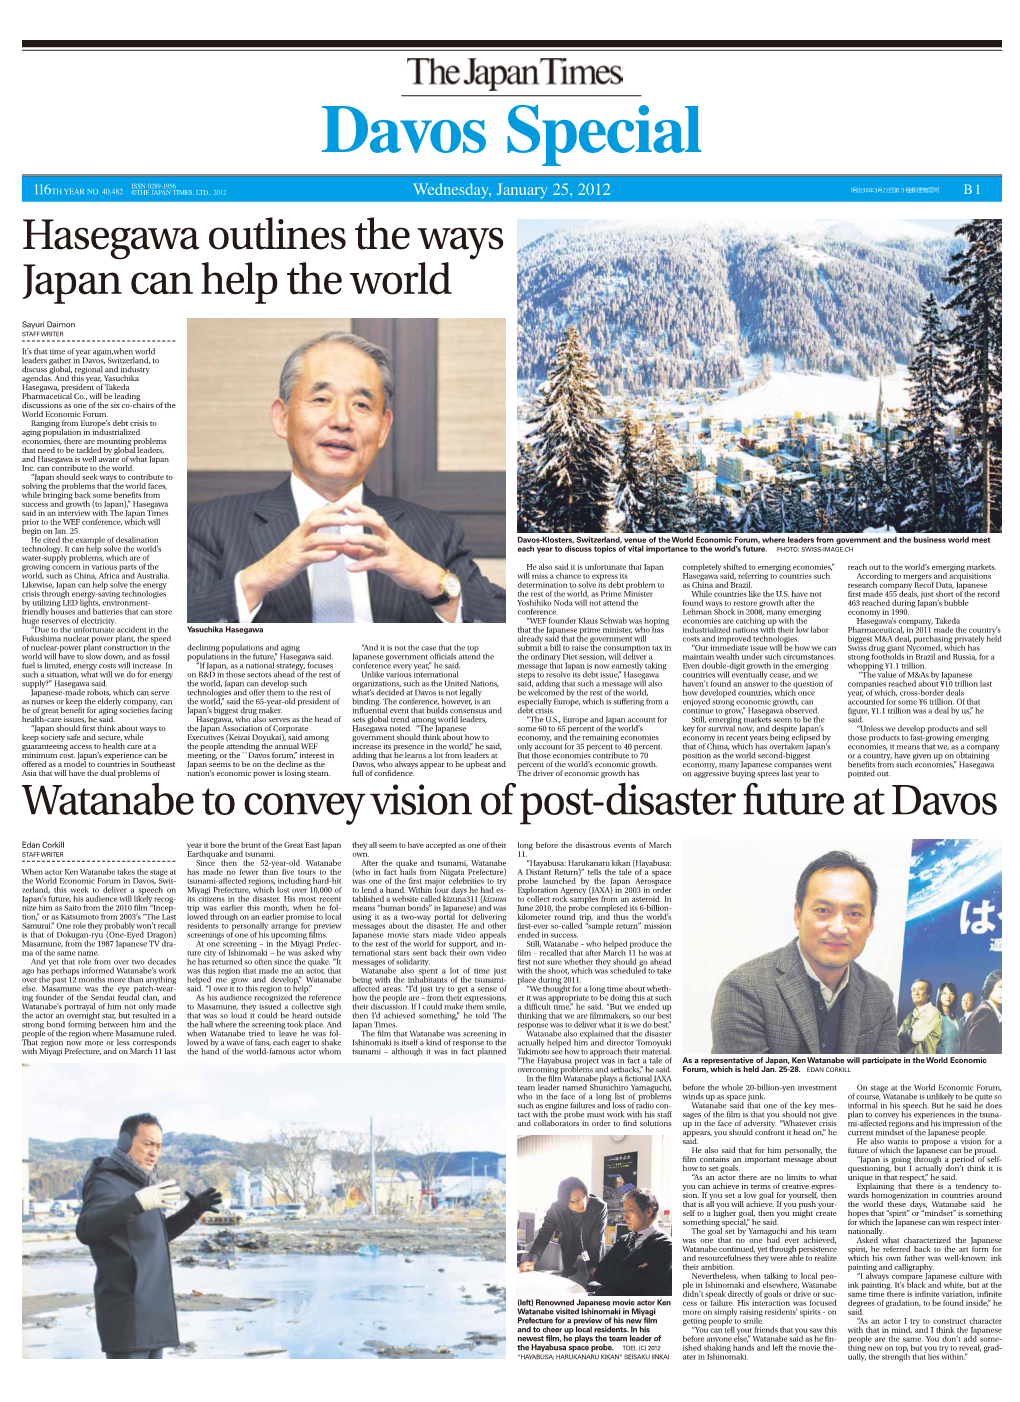 Hasegawa Outlines the Ways Japan Can Help the World Watanabe to Convey Vision of Post-Disaster Future at Davos